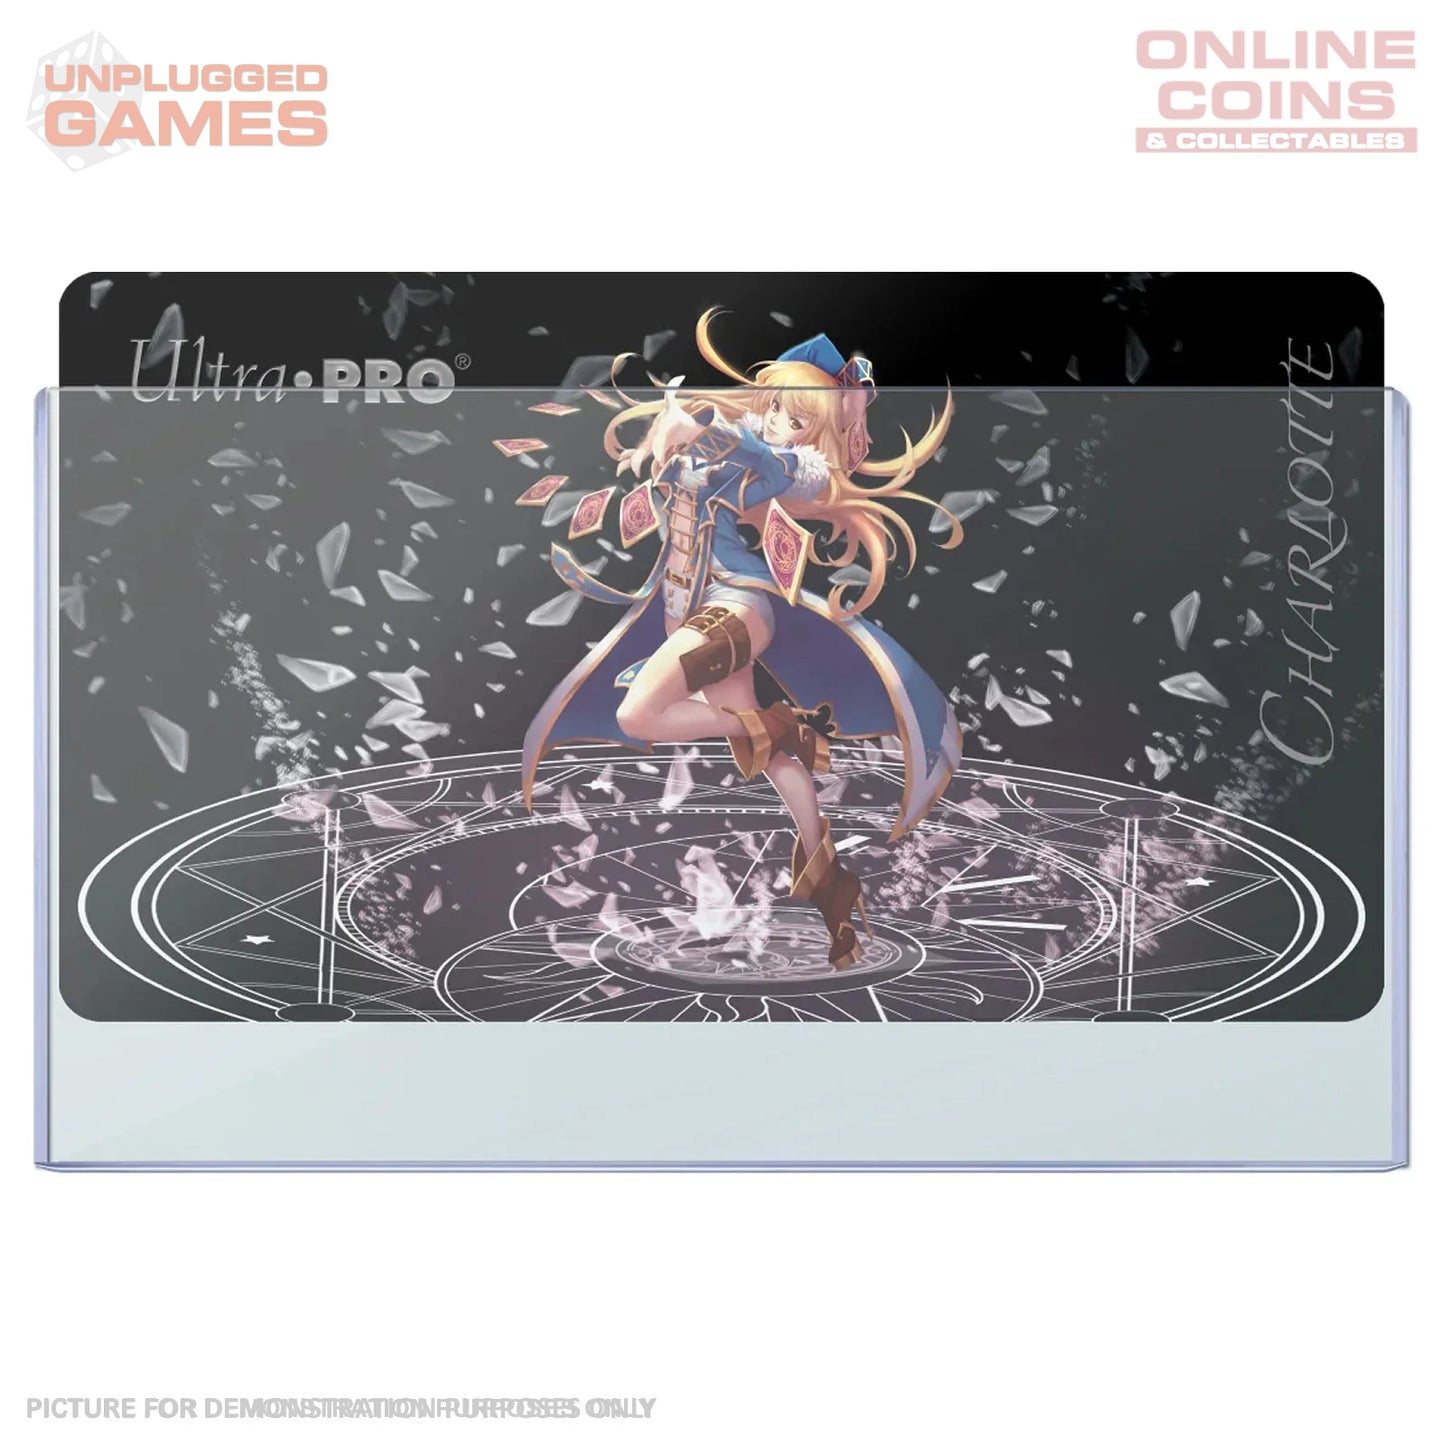 Ultra Pro Playmat Toploaders 24" x 13.5" - PACK OF 5